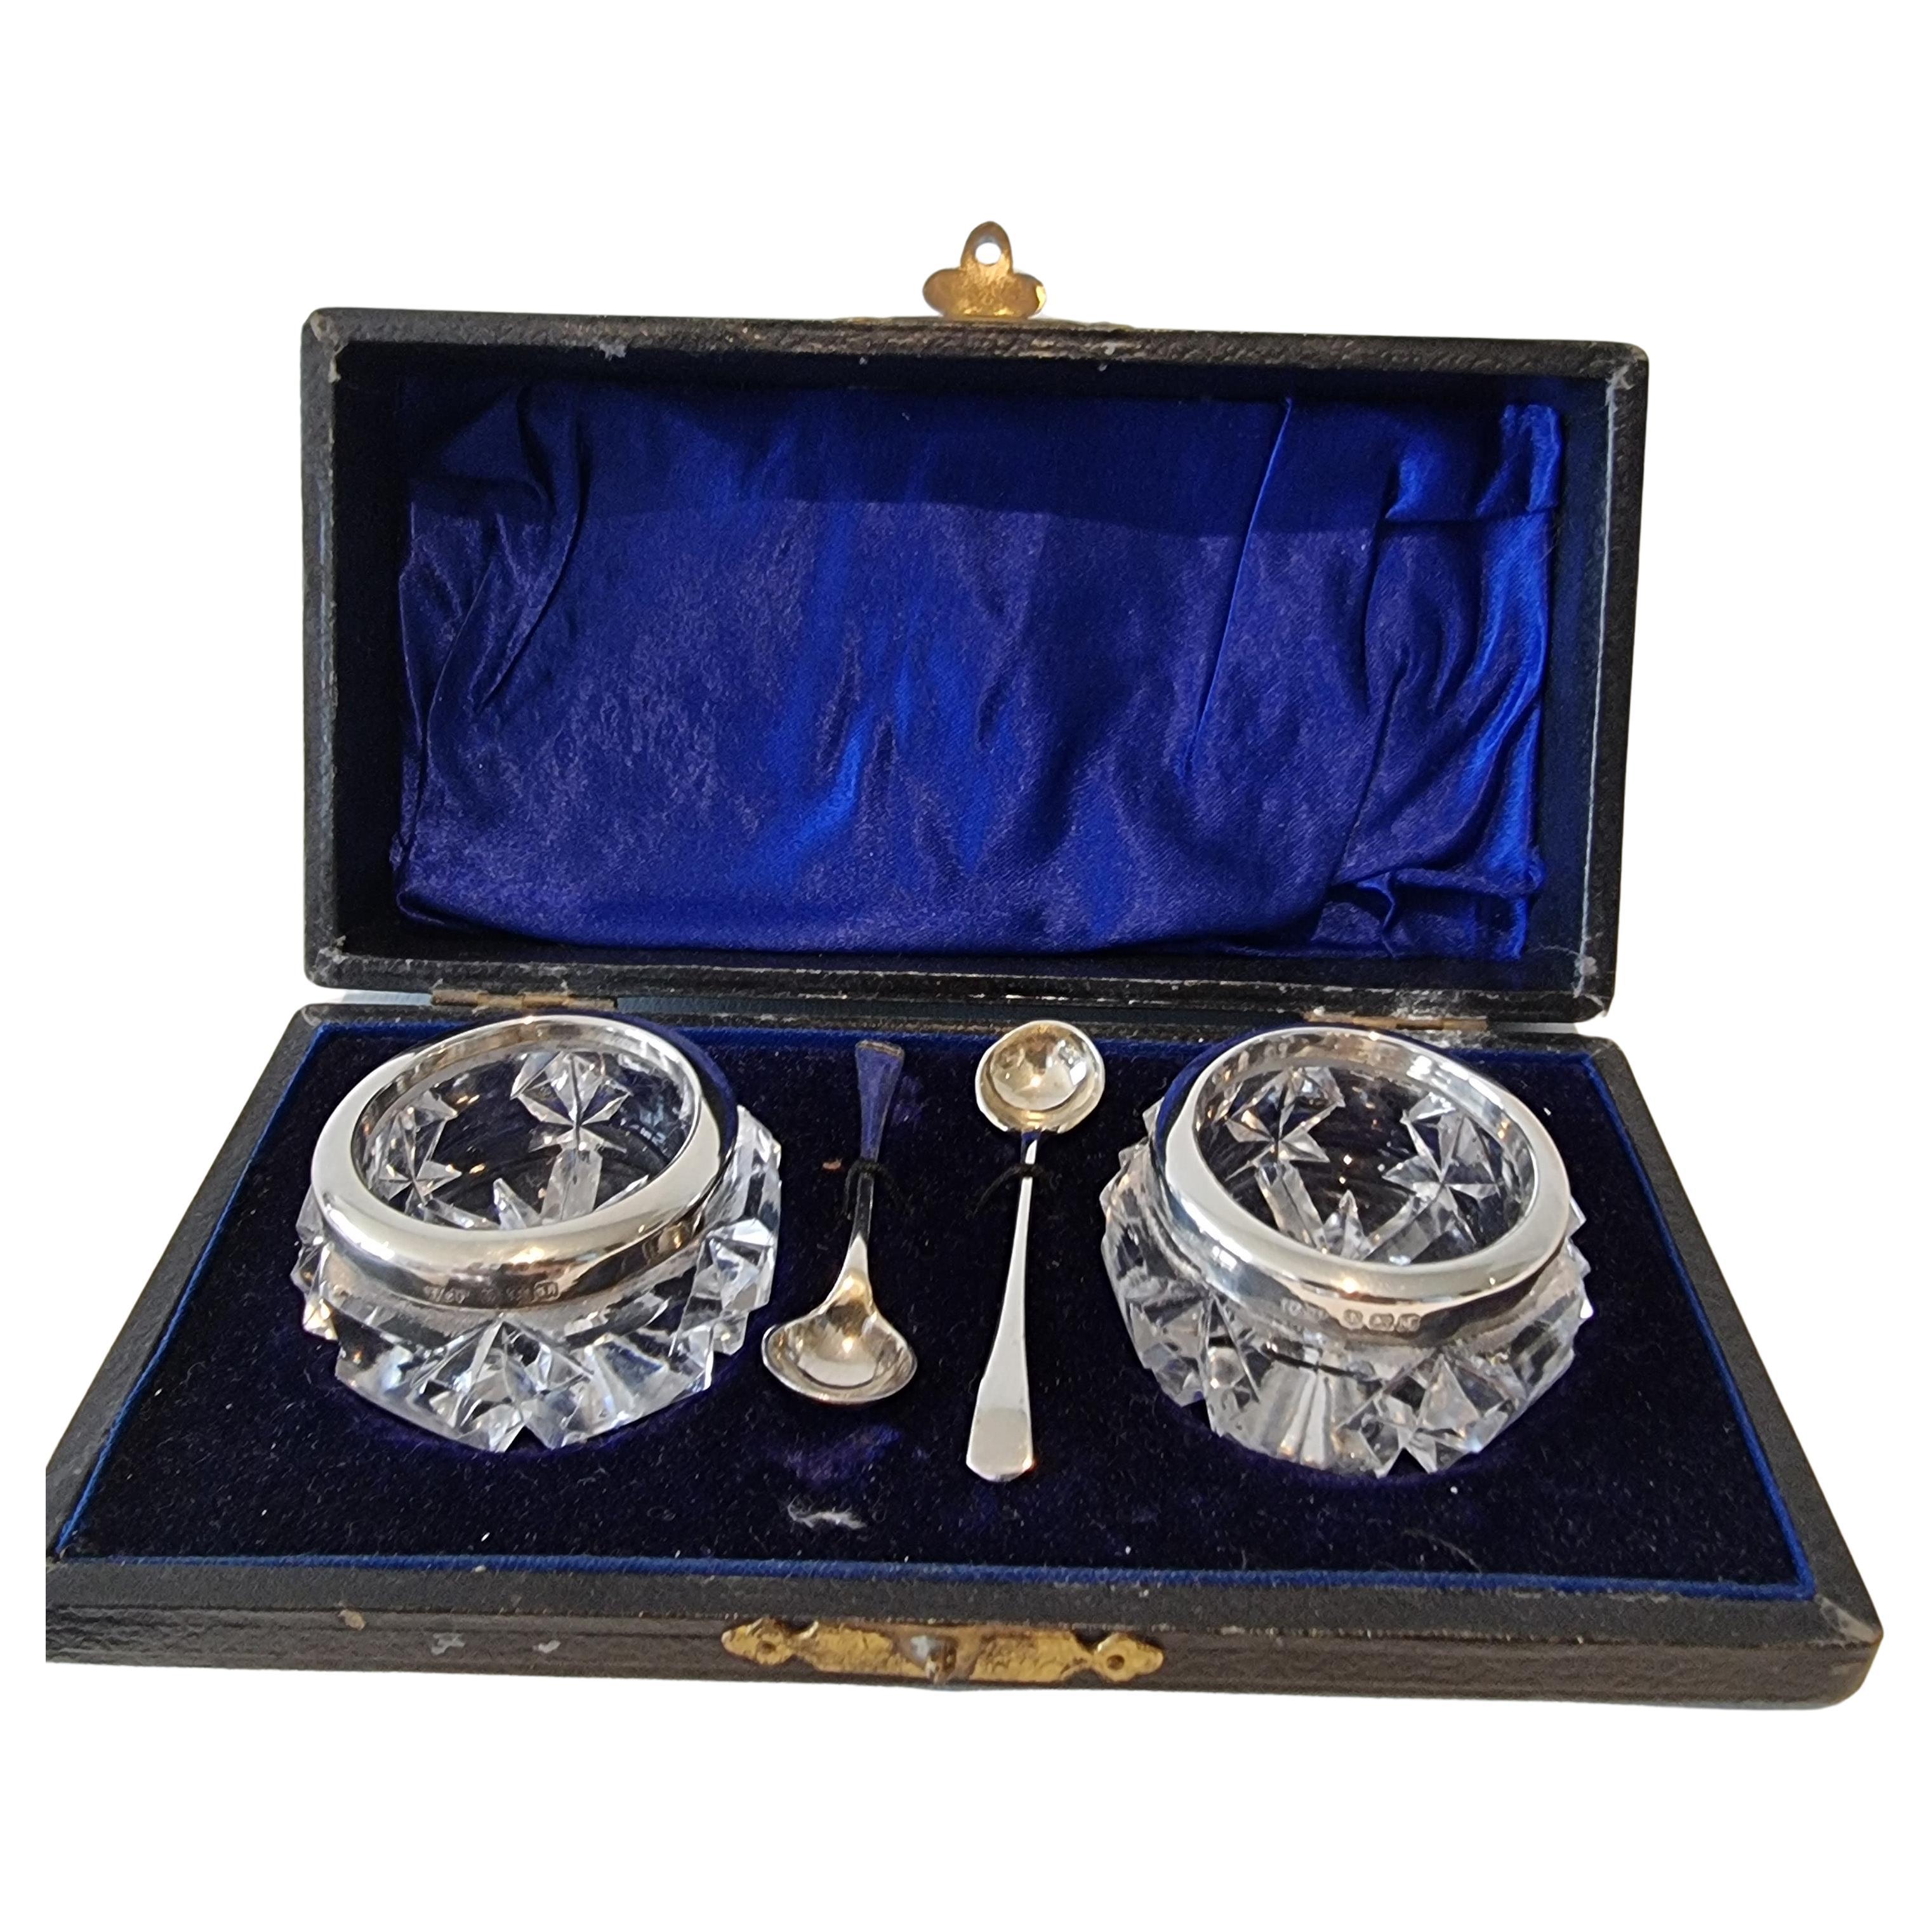 A fine Pair of Silver and Cut Glass Salt and Pepper Pots with spoons in original For Sale